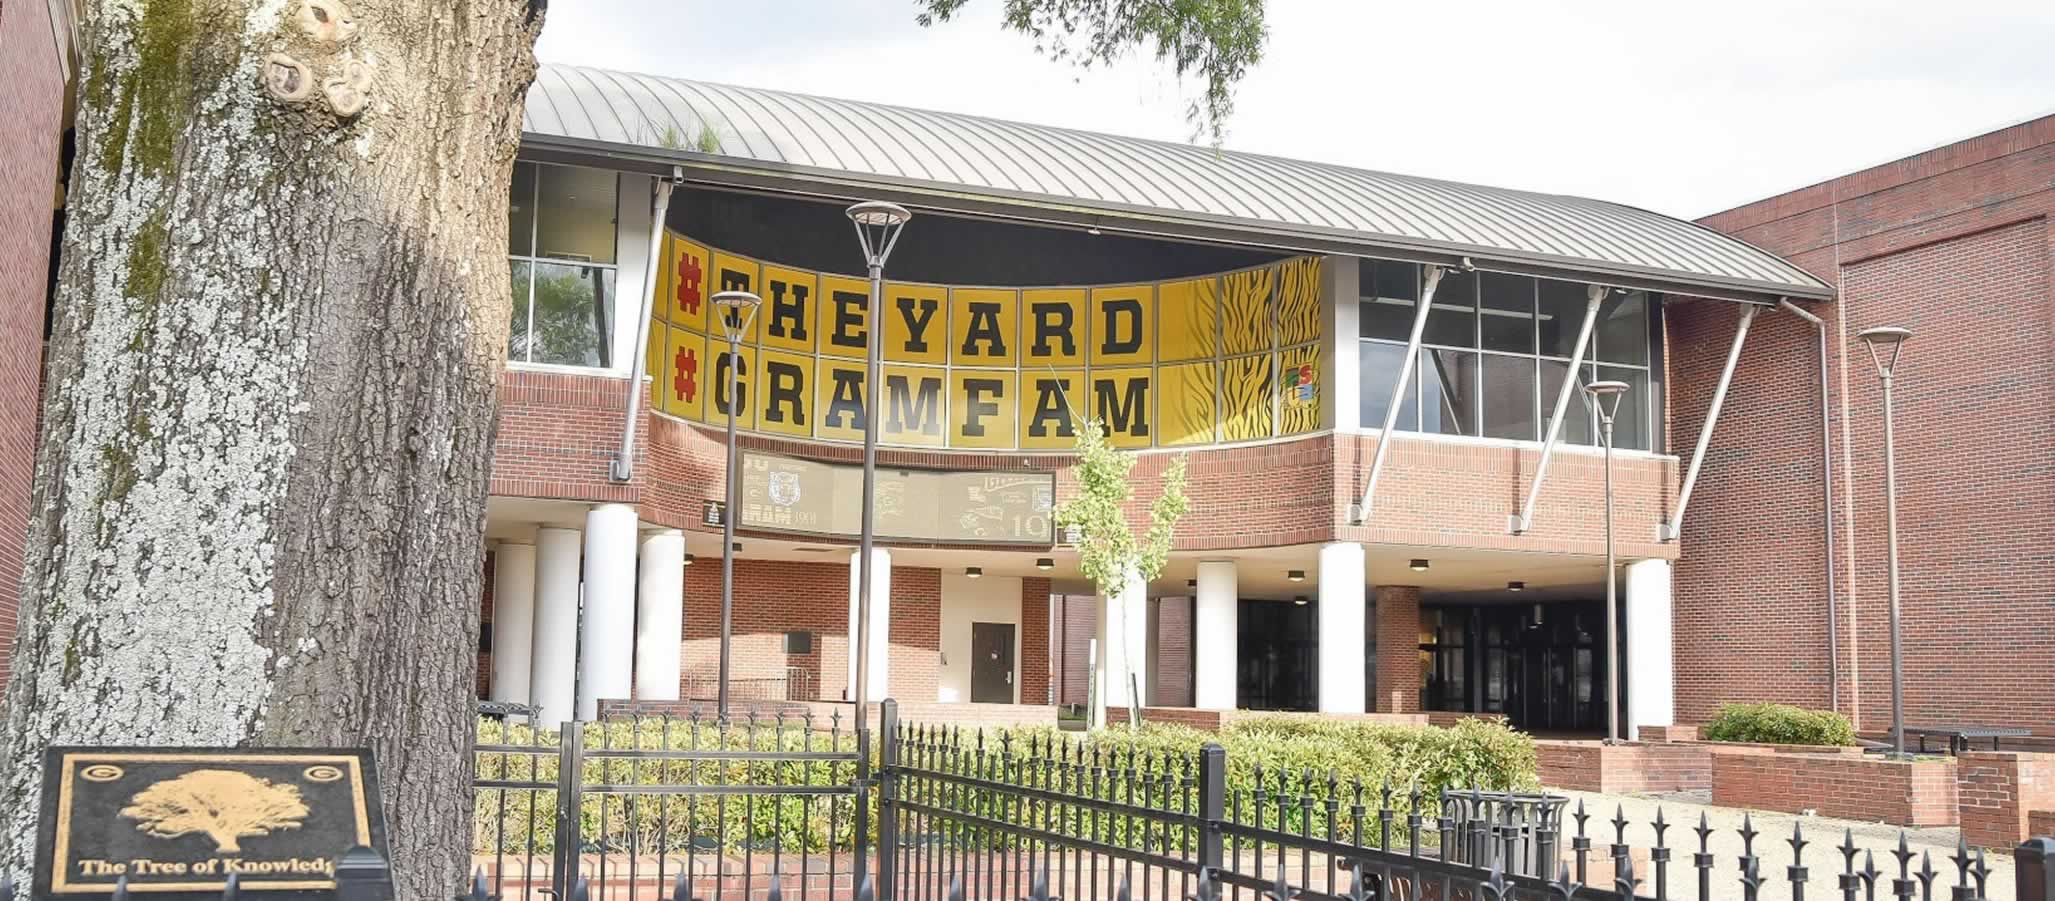 Photograph of a building on campus with a banner showing hashtags that say The Yard and Gram Fam.